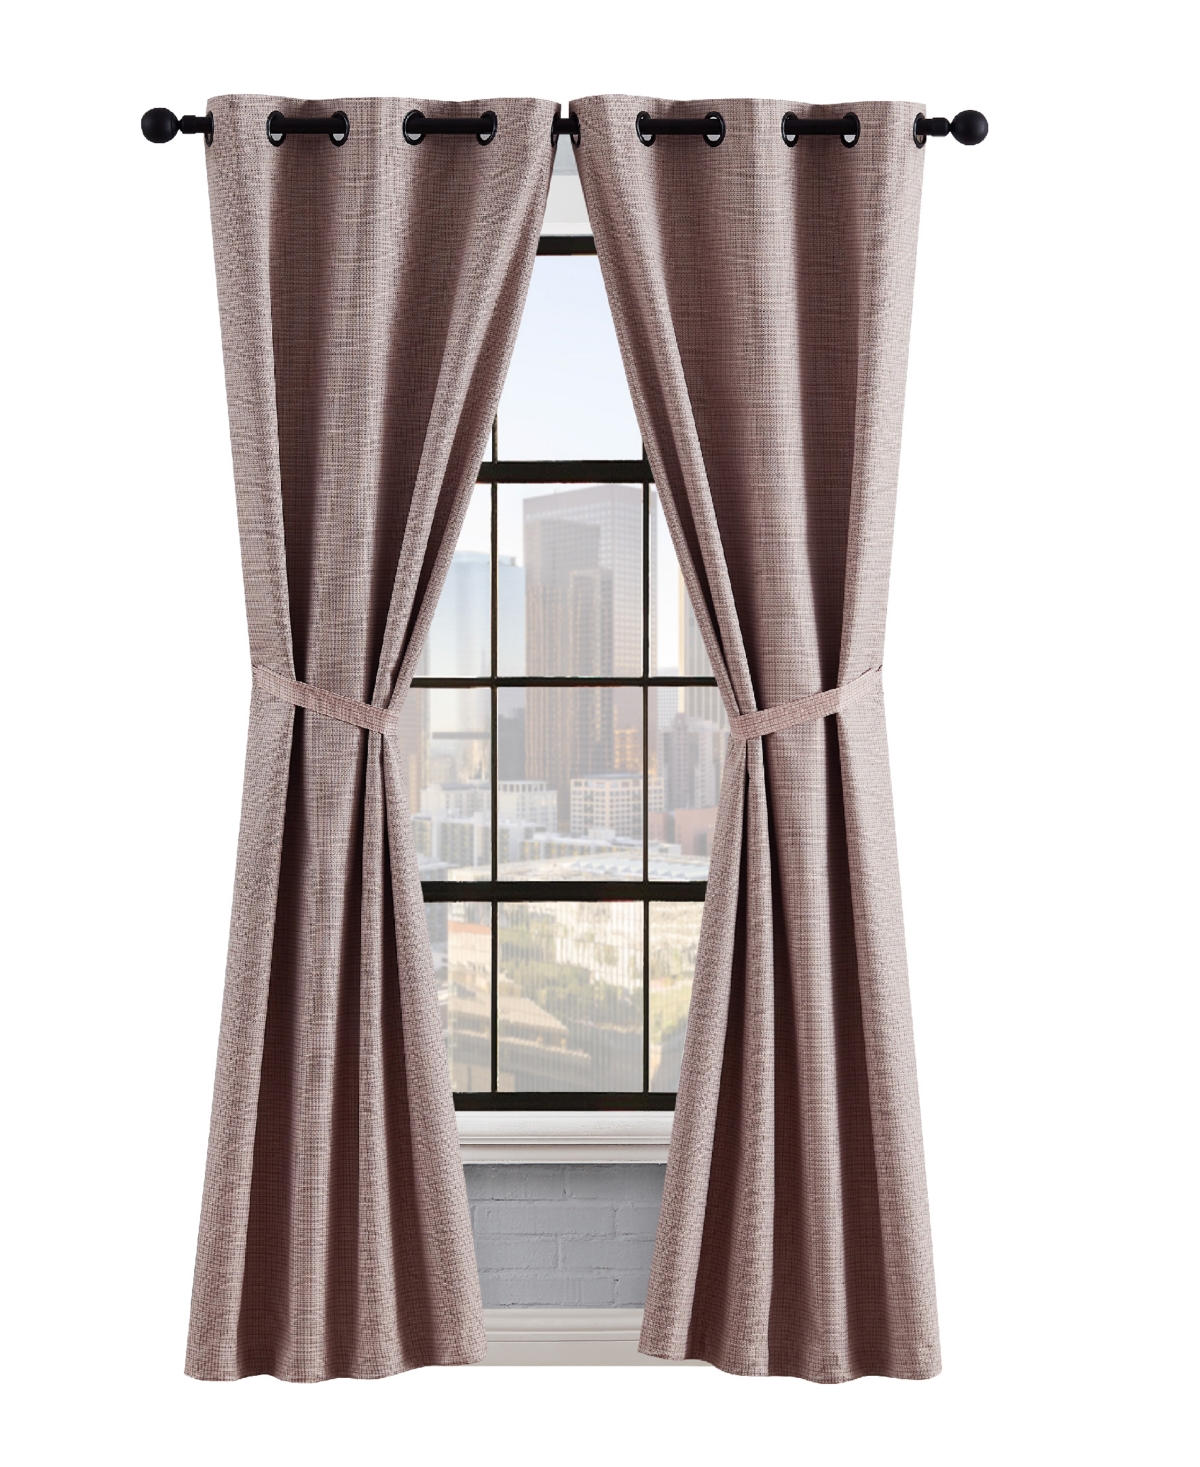 Lucky Brand Finley Textured Blackout Grommet Window Curtain Panel Pair With Tiebacks, 38" X 84" In Blush Pink